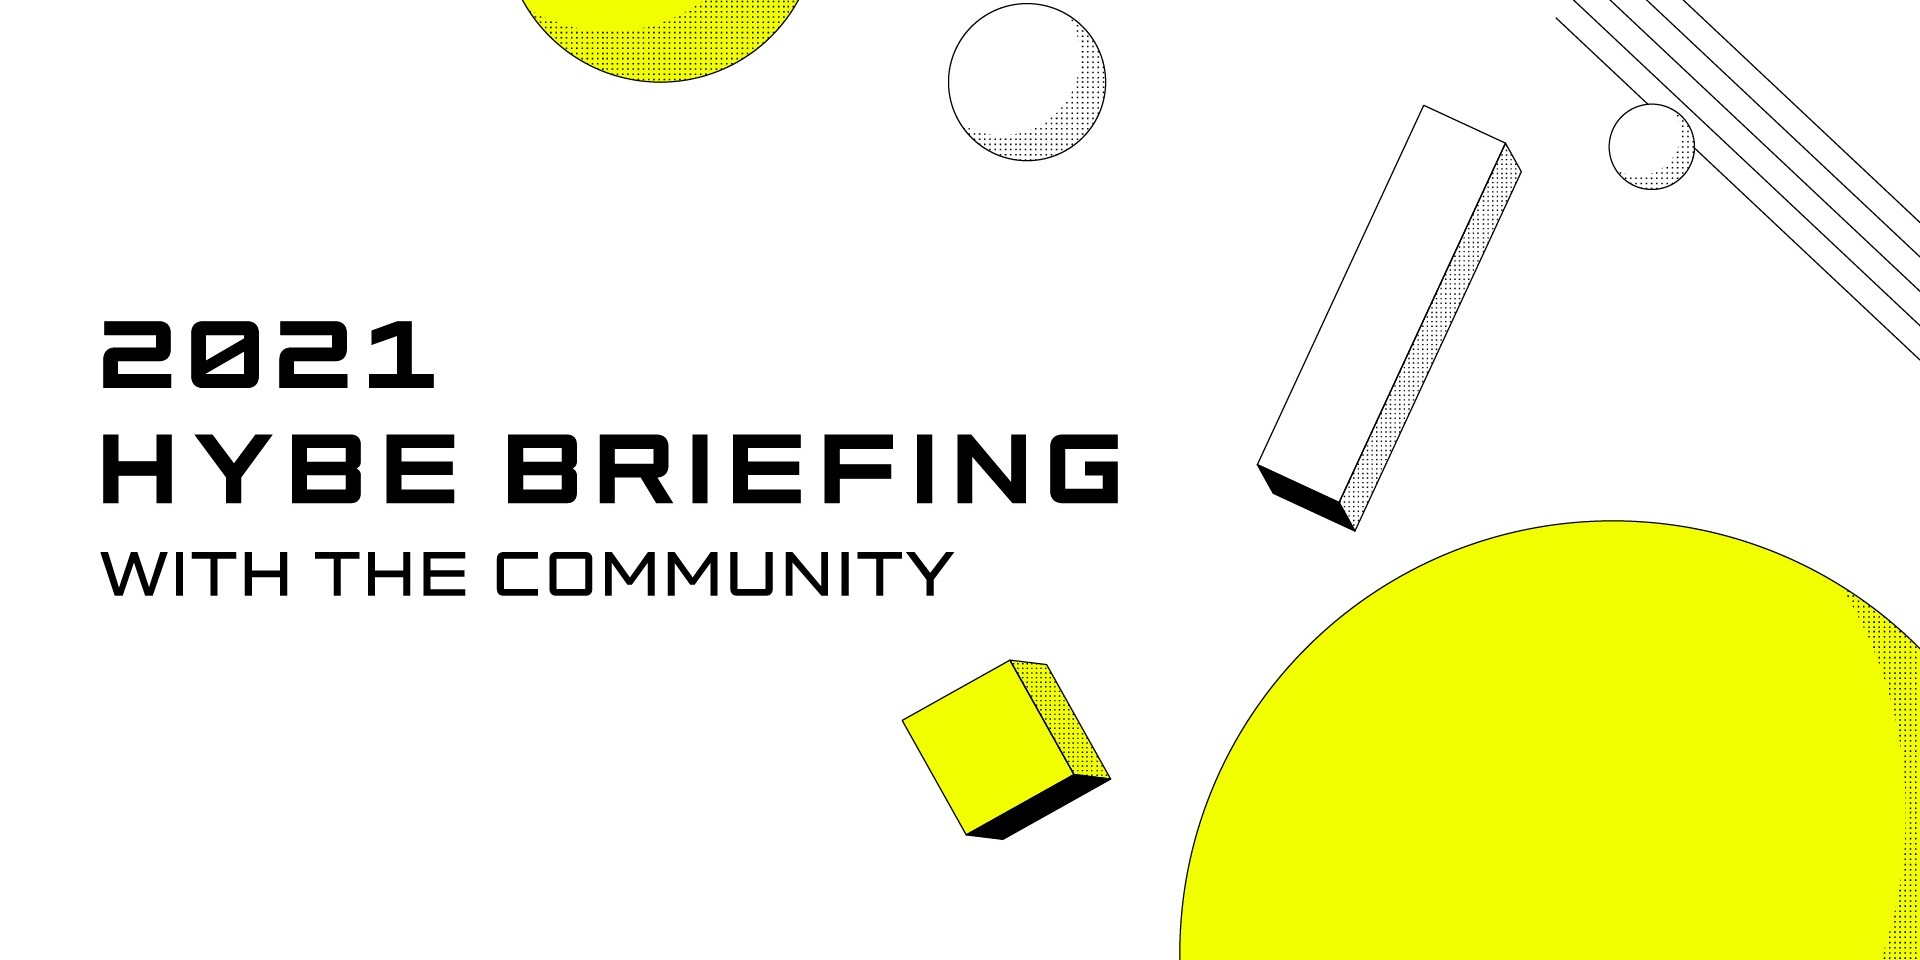 Here's a summary of HYBE's 2021 briefing — webtoons with BTS, TXT, and ENHYPEN, digital photocards, NFTs, global girl group auditions, and more